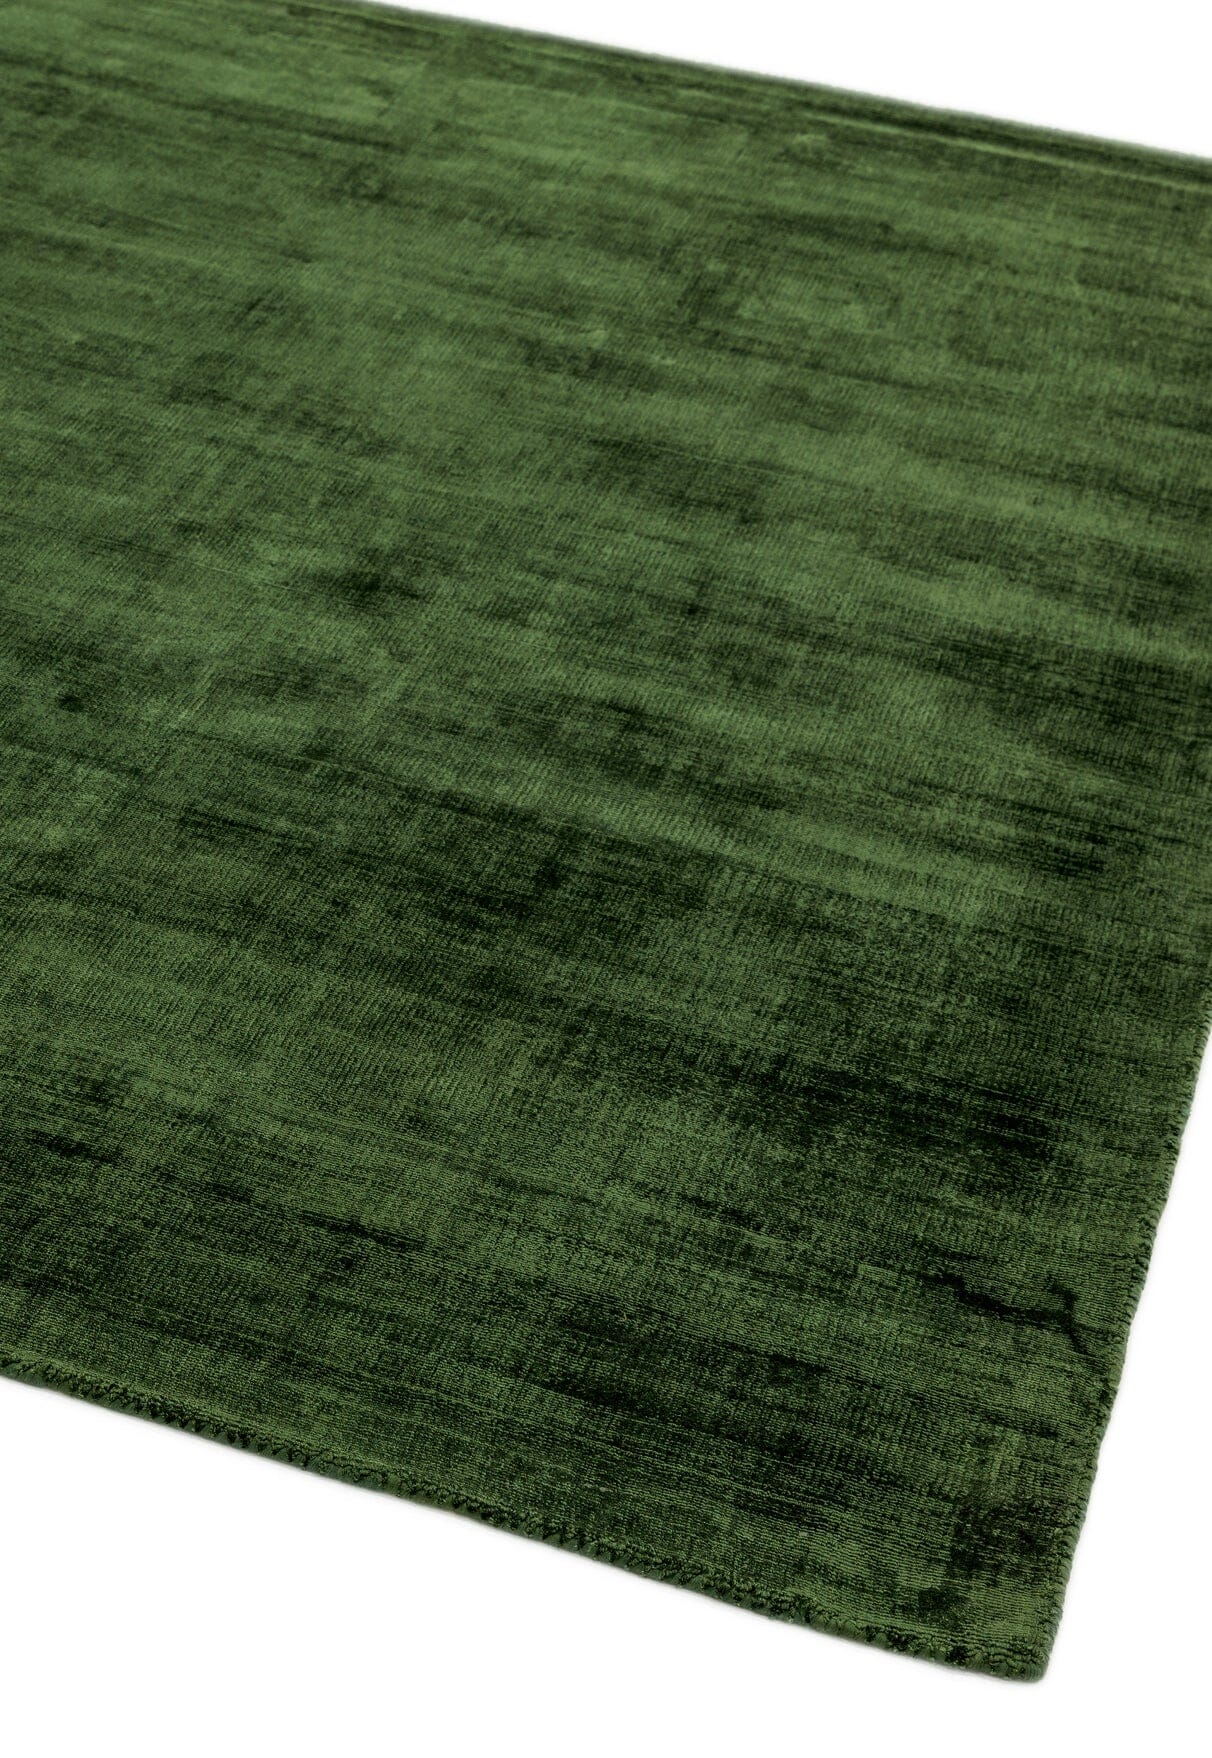  Asiatic Carpets-Asiatic Carpets Blade Hand Woven Rug Green - 120 x 170cm-Green 533 